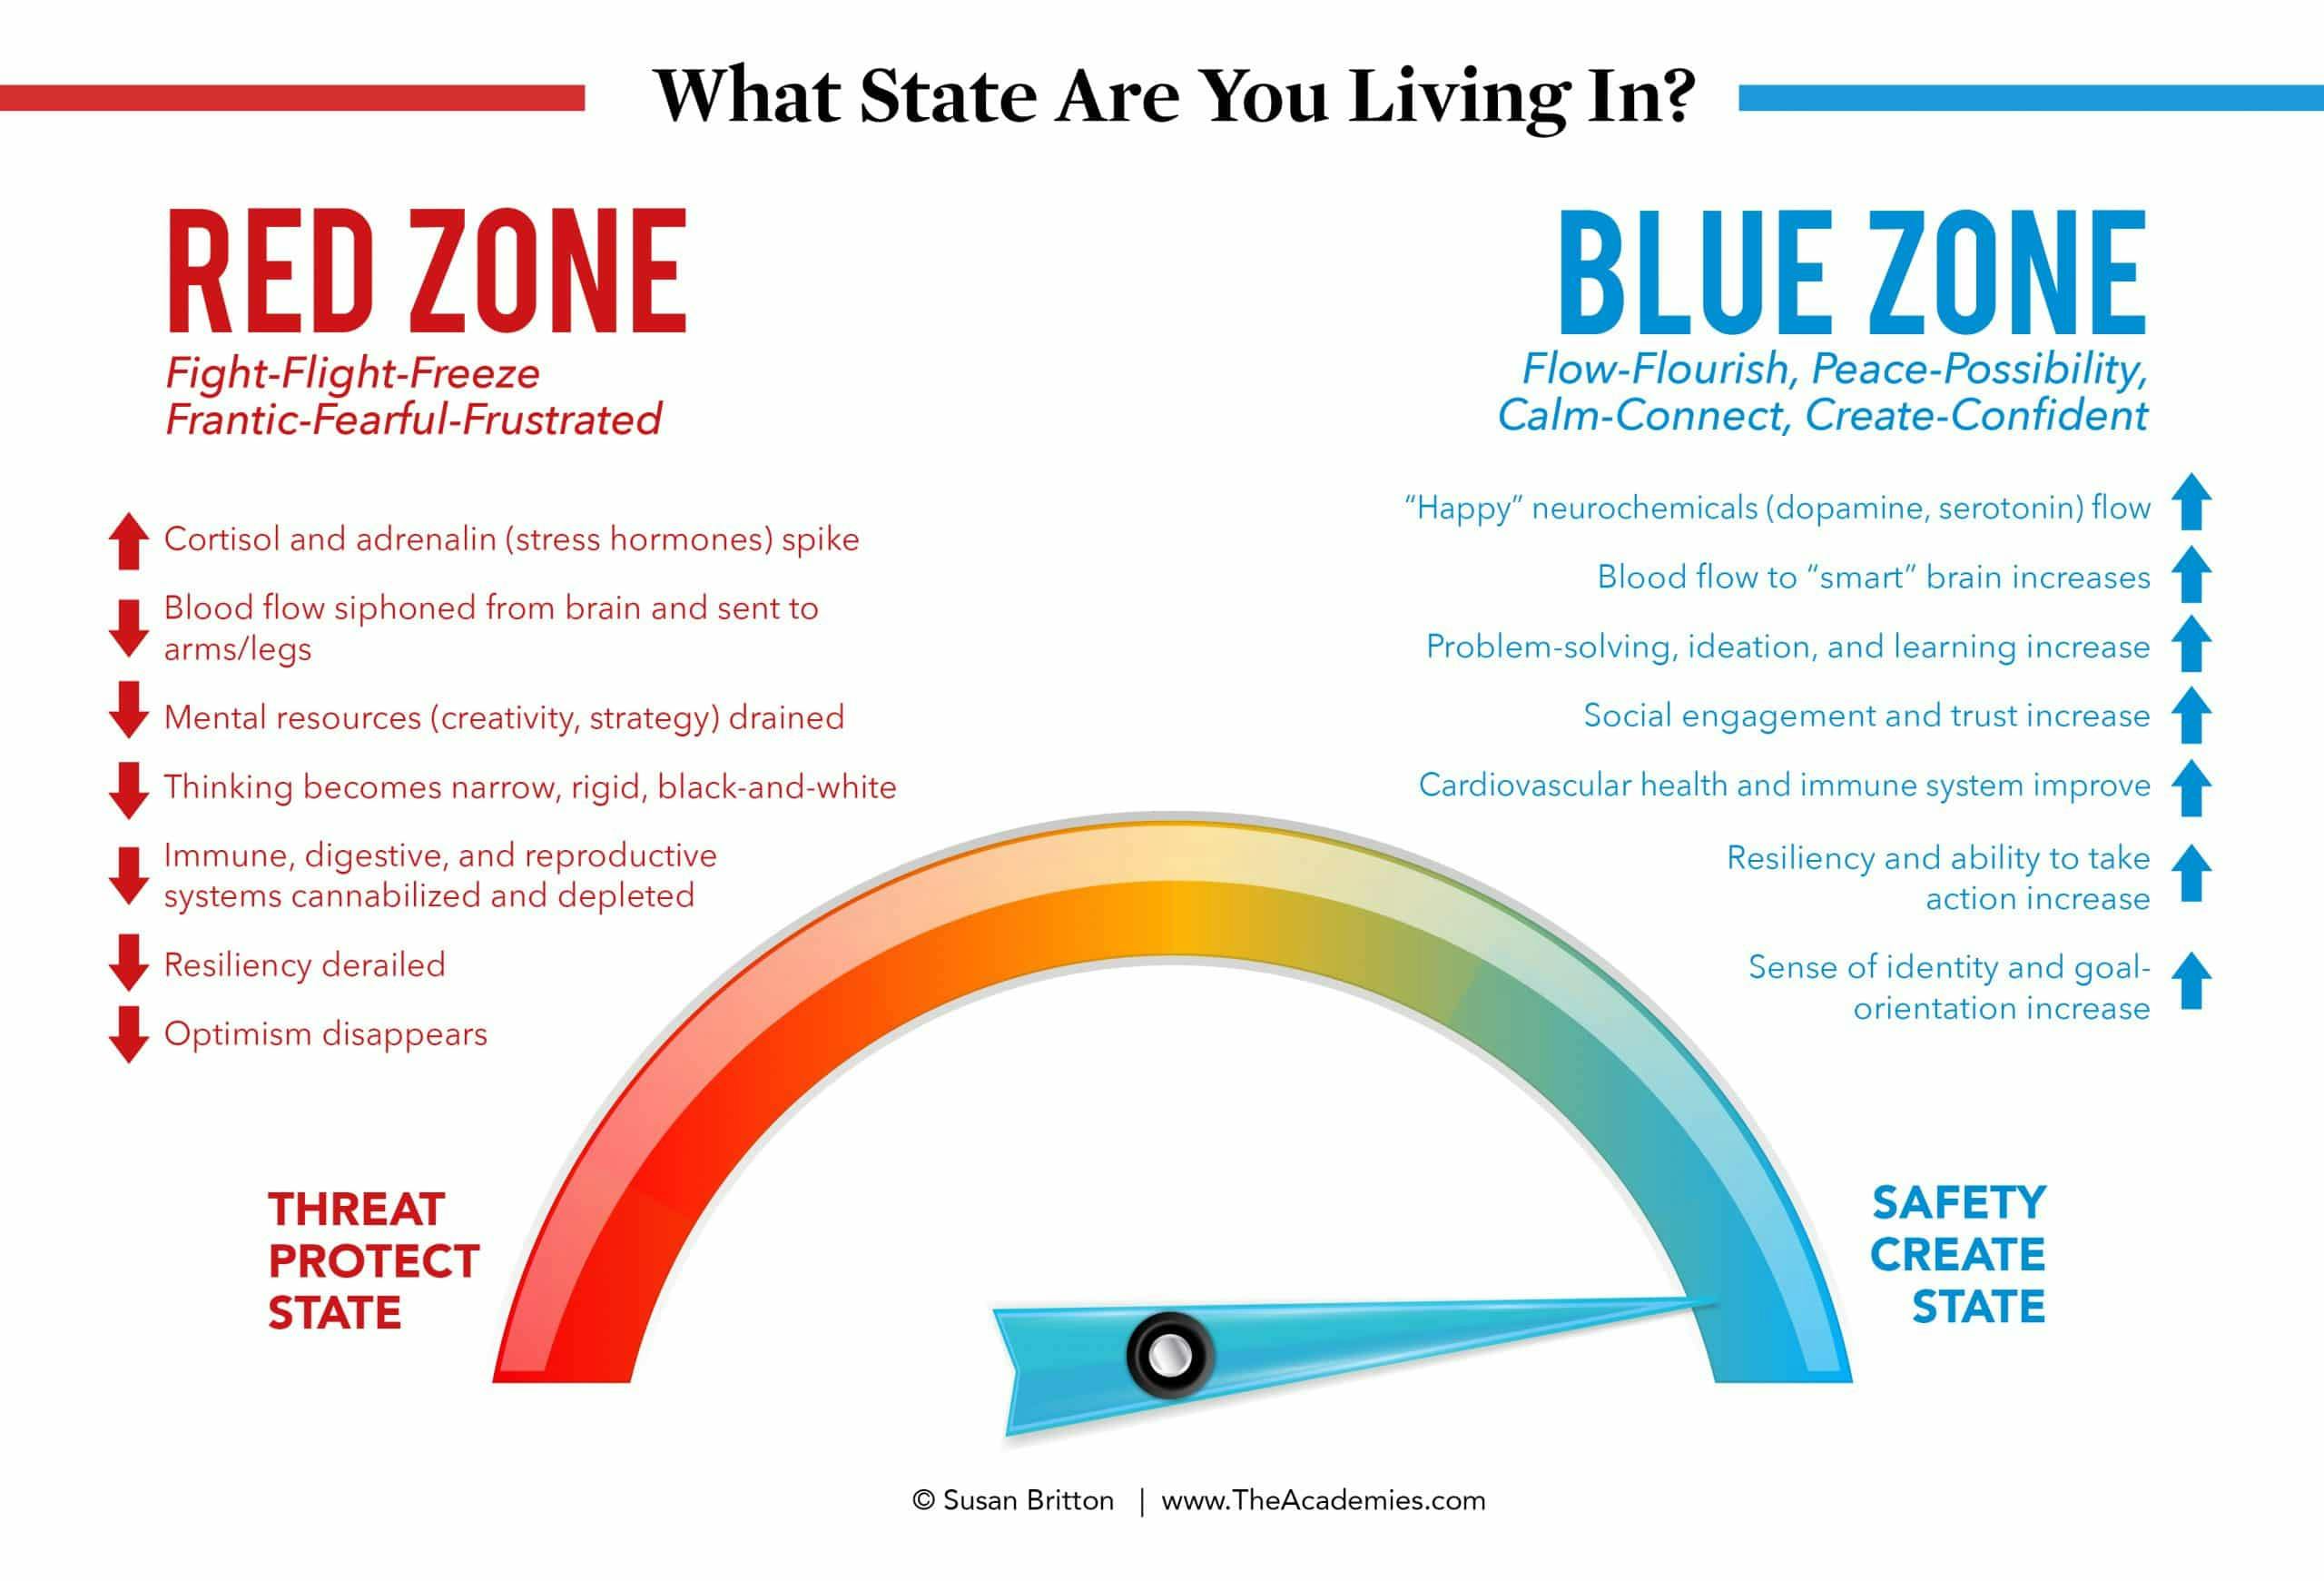 A graphic of the "Red Zone" and "Blue Zone"